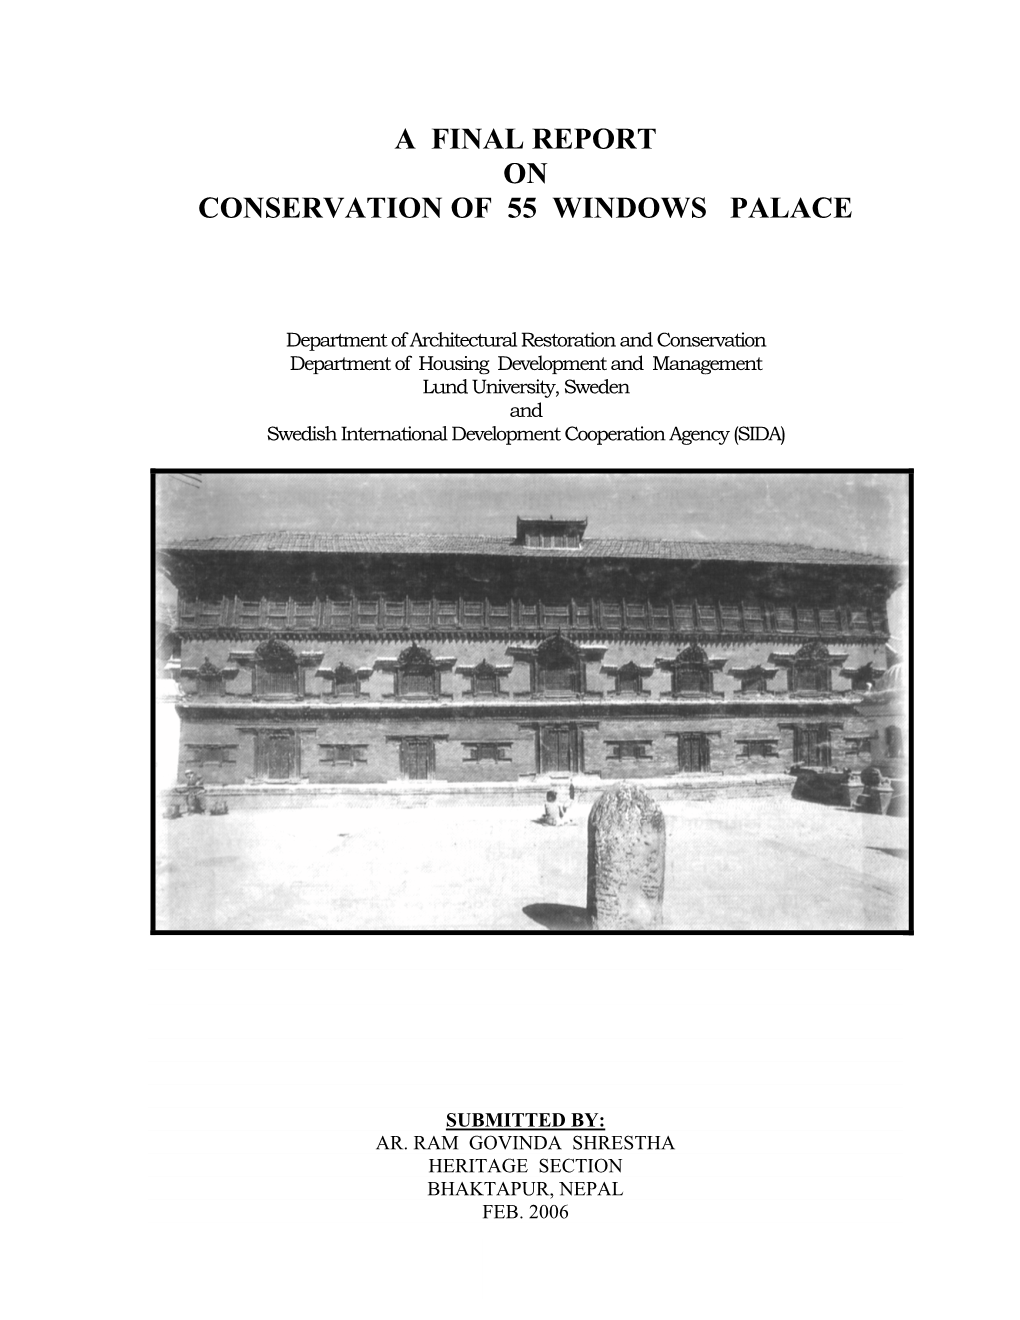 A Final Report on Conservation of 55 Windows Palace